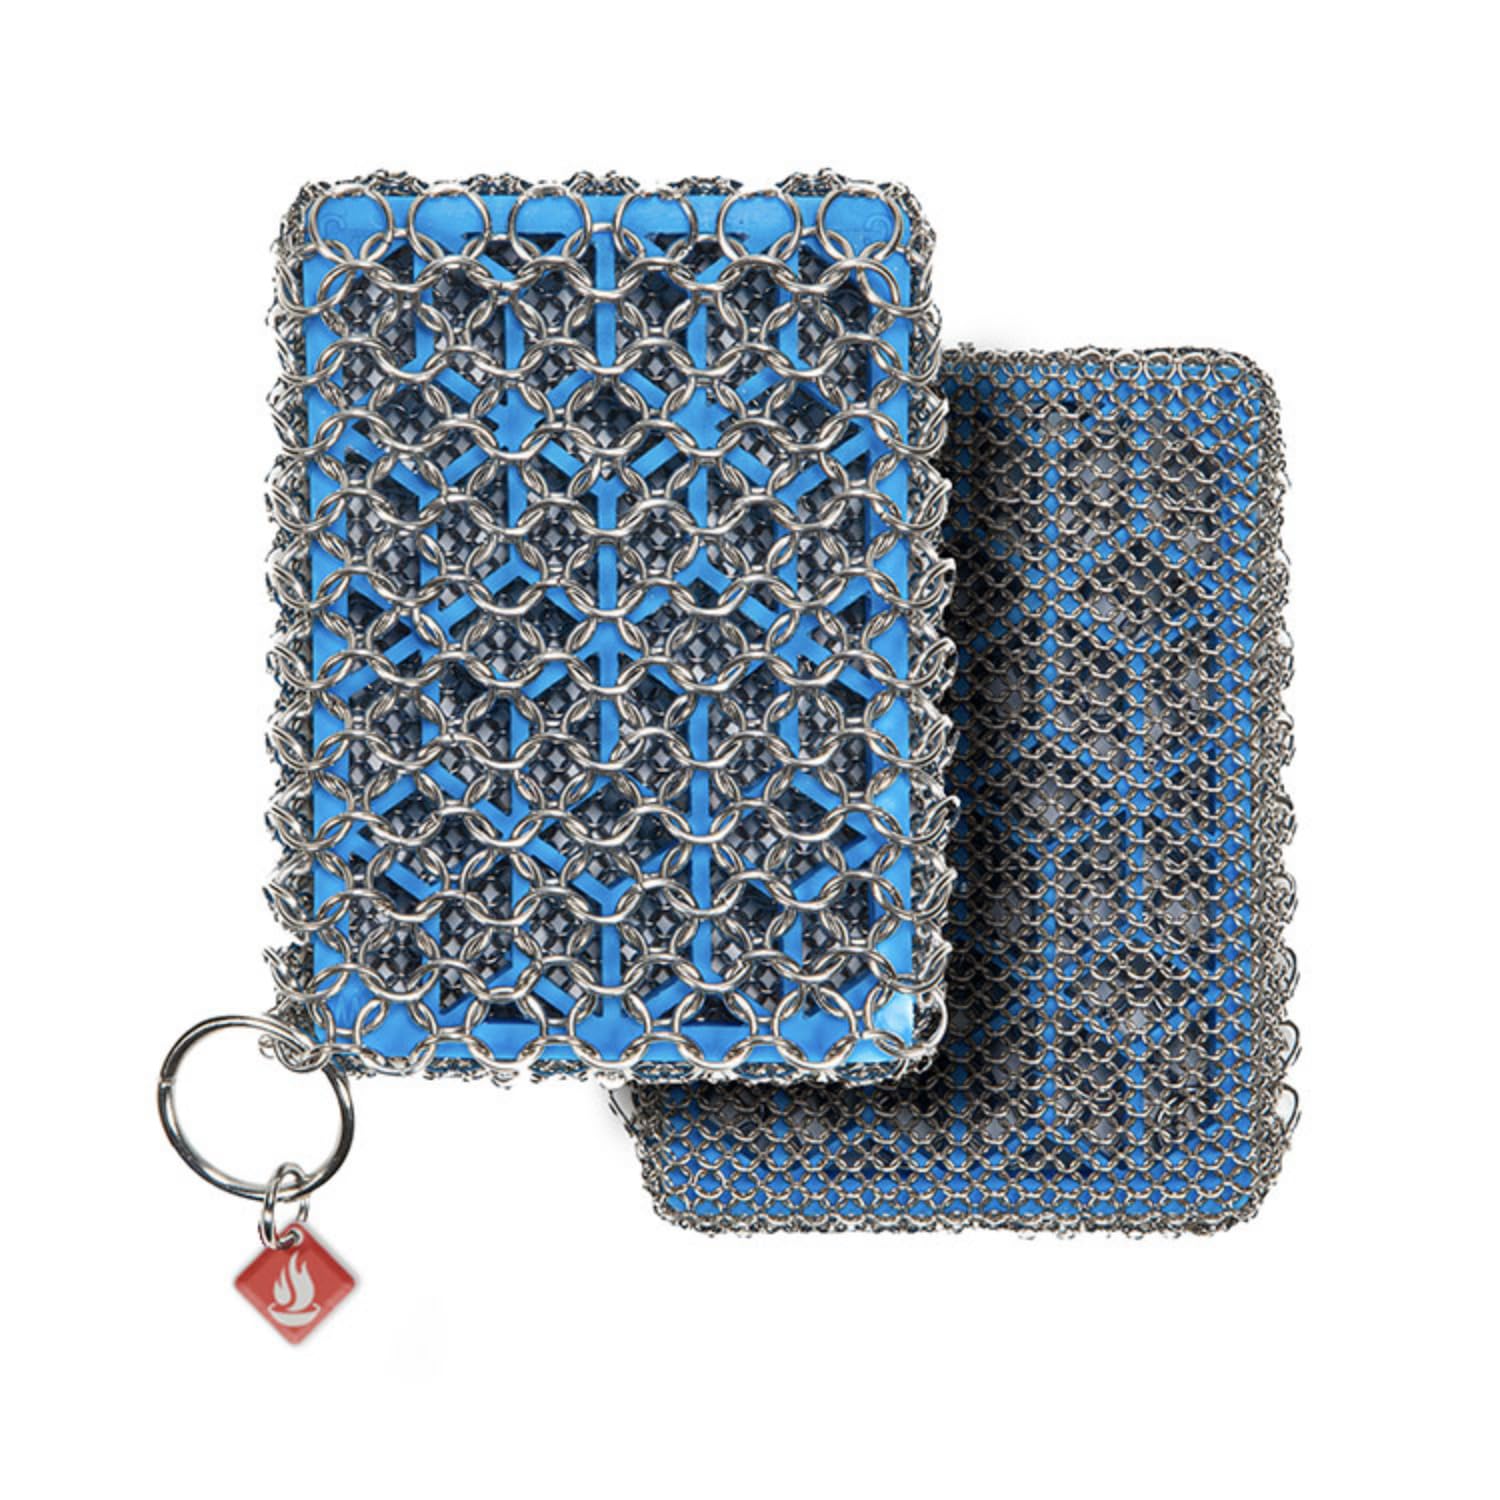 CHAINMAIL COMBO SCRUBBER WITH SILICONE CORE